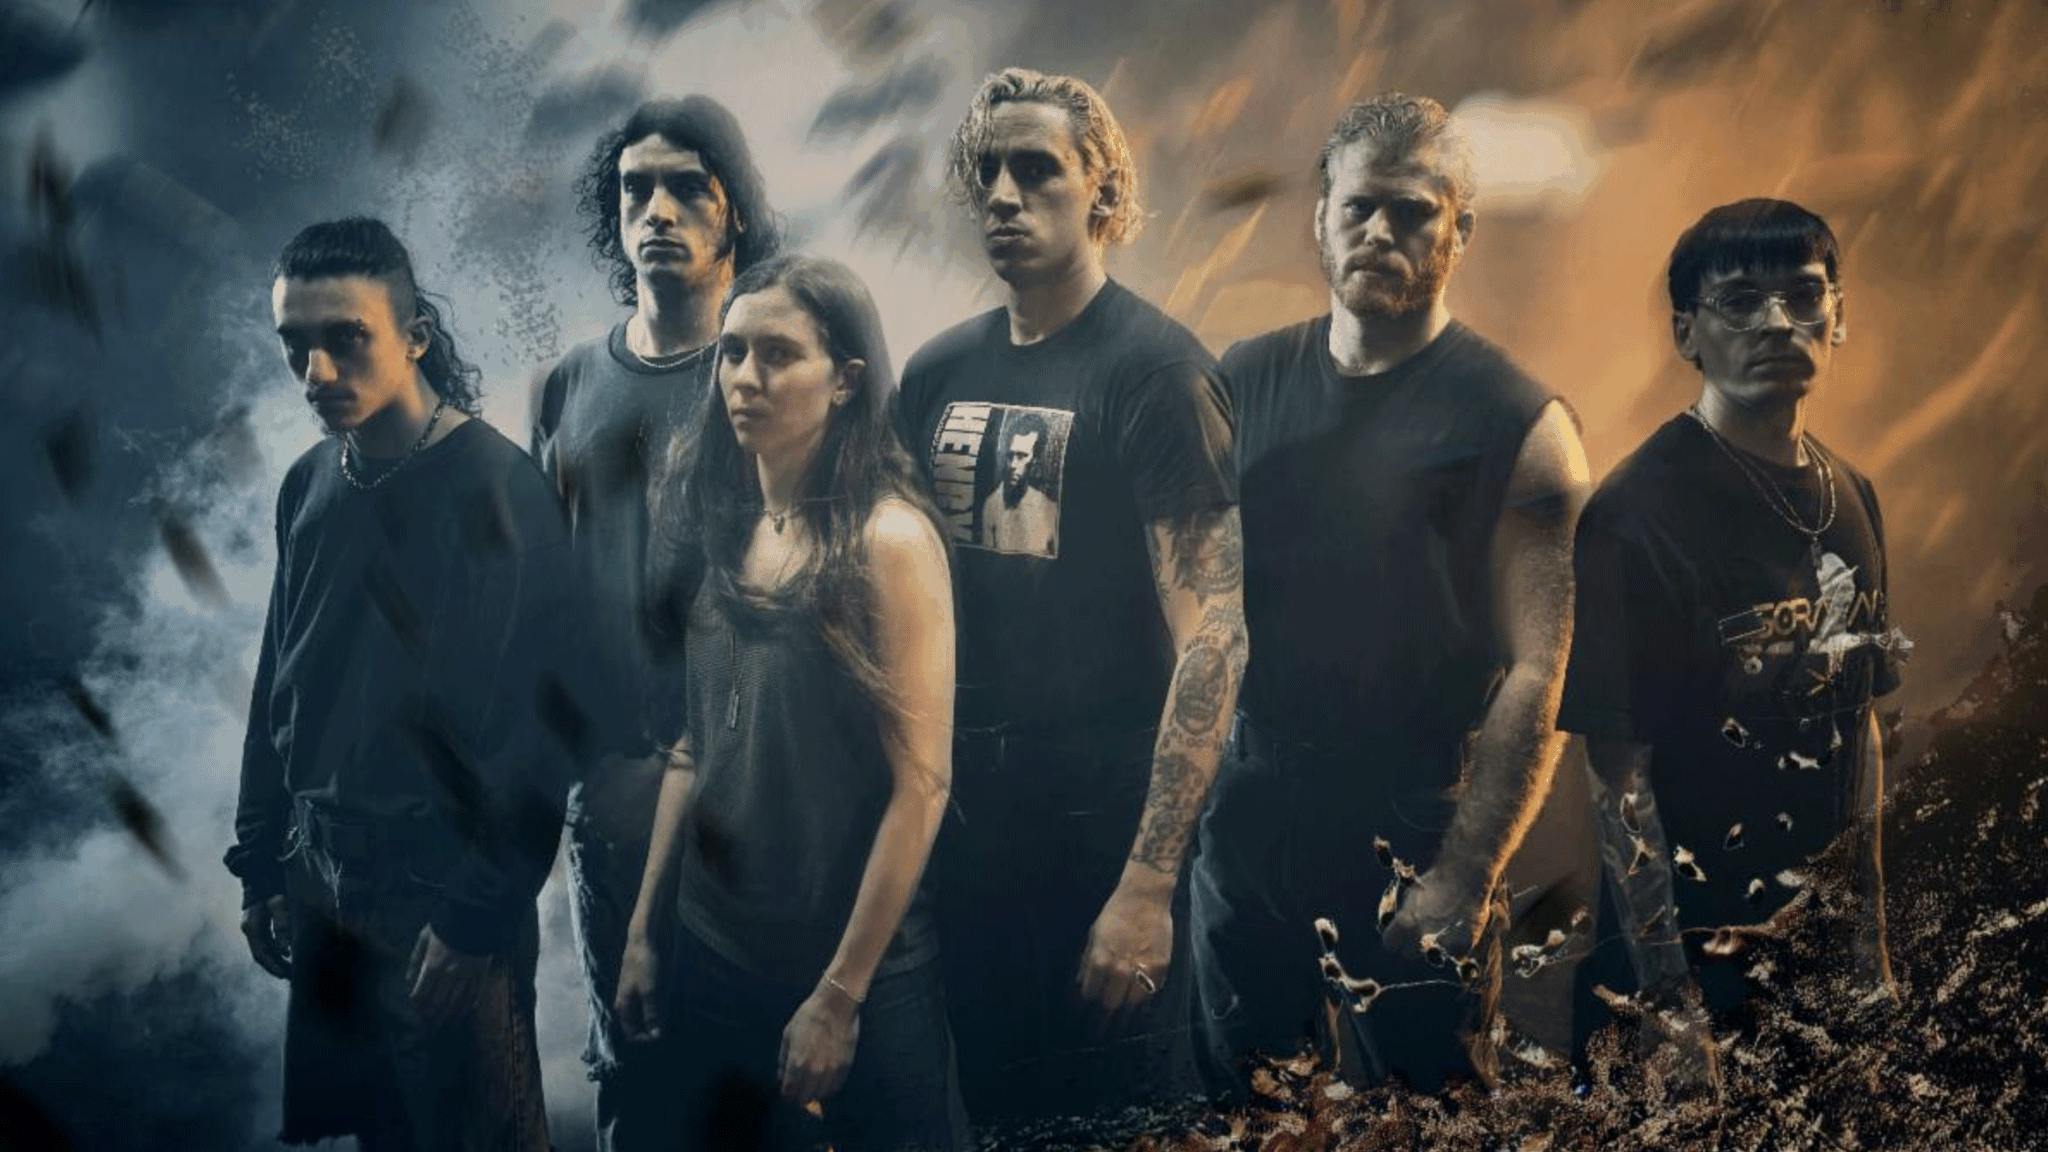 Code Orange have just released two brand-new singles